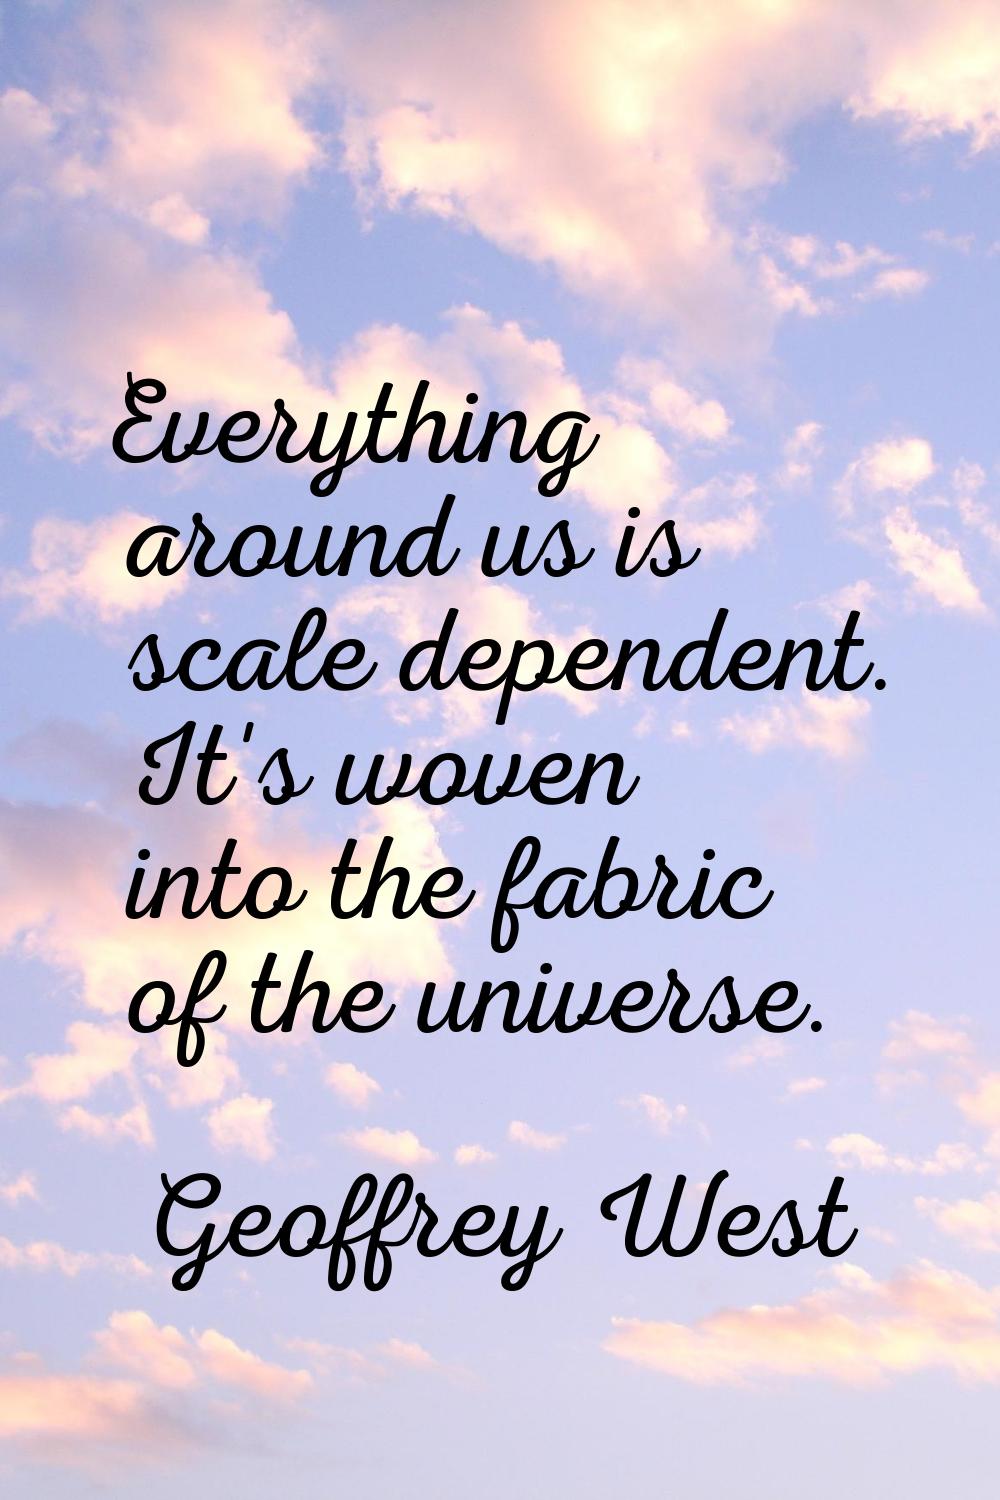 Everything around us is scale dependent. It's woven into the fabric of the universe.